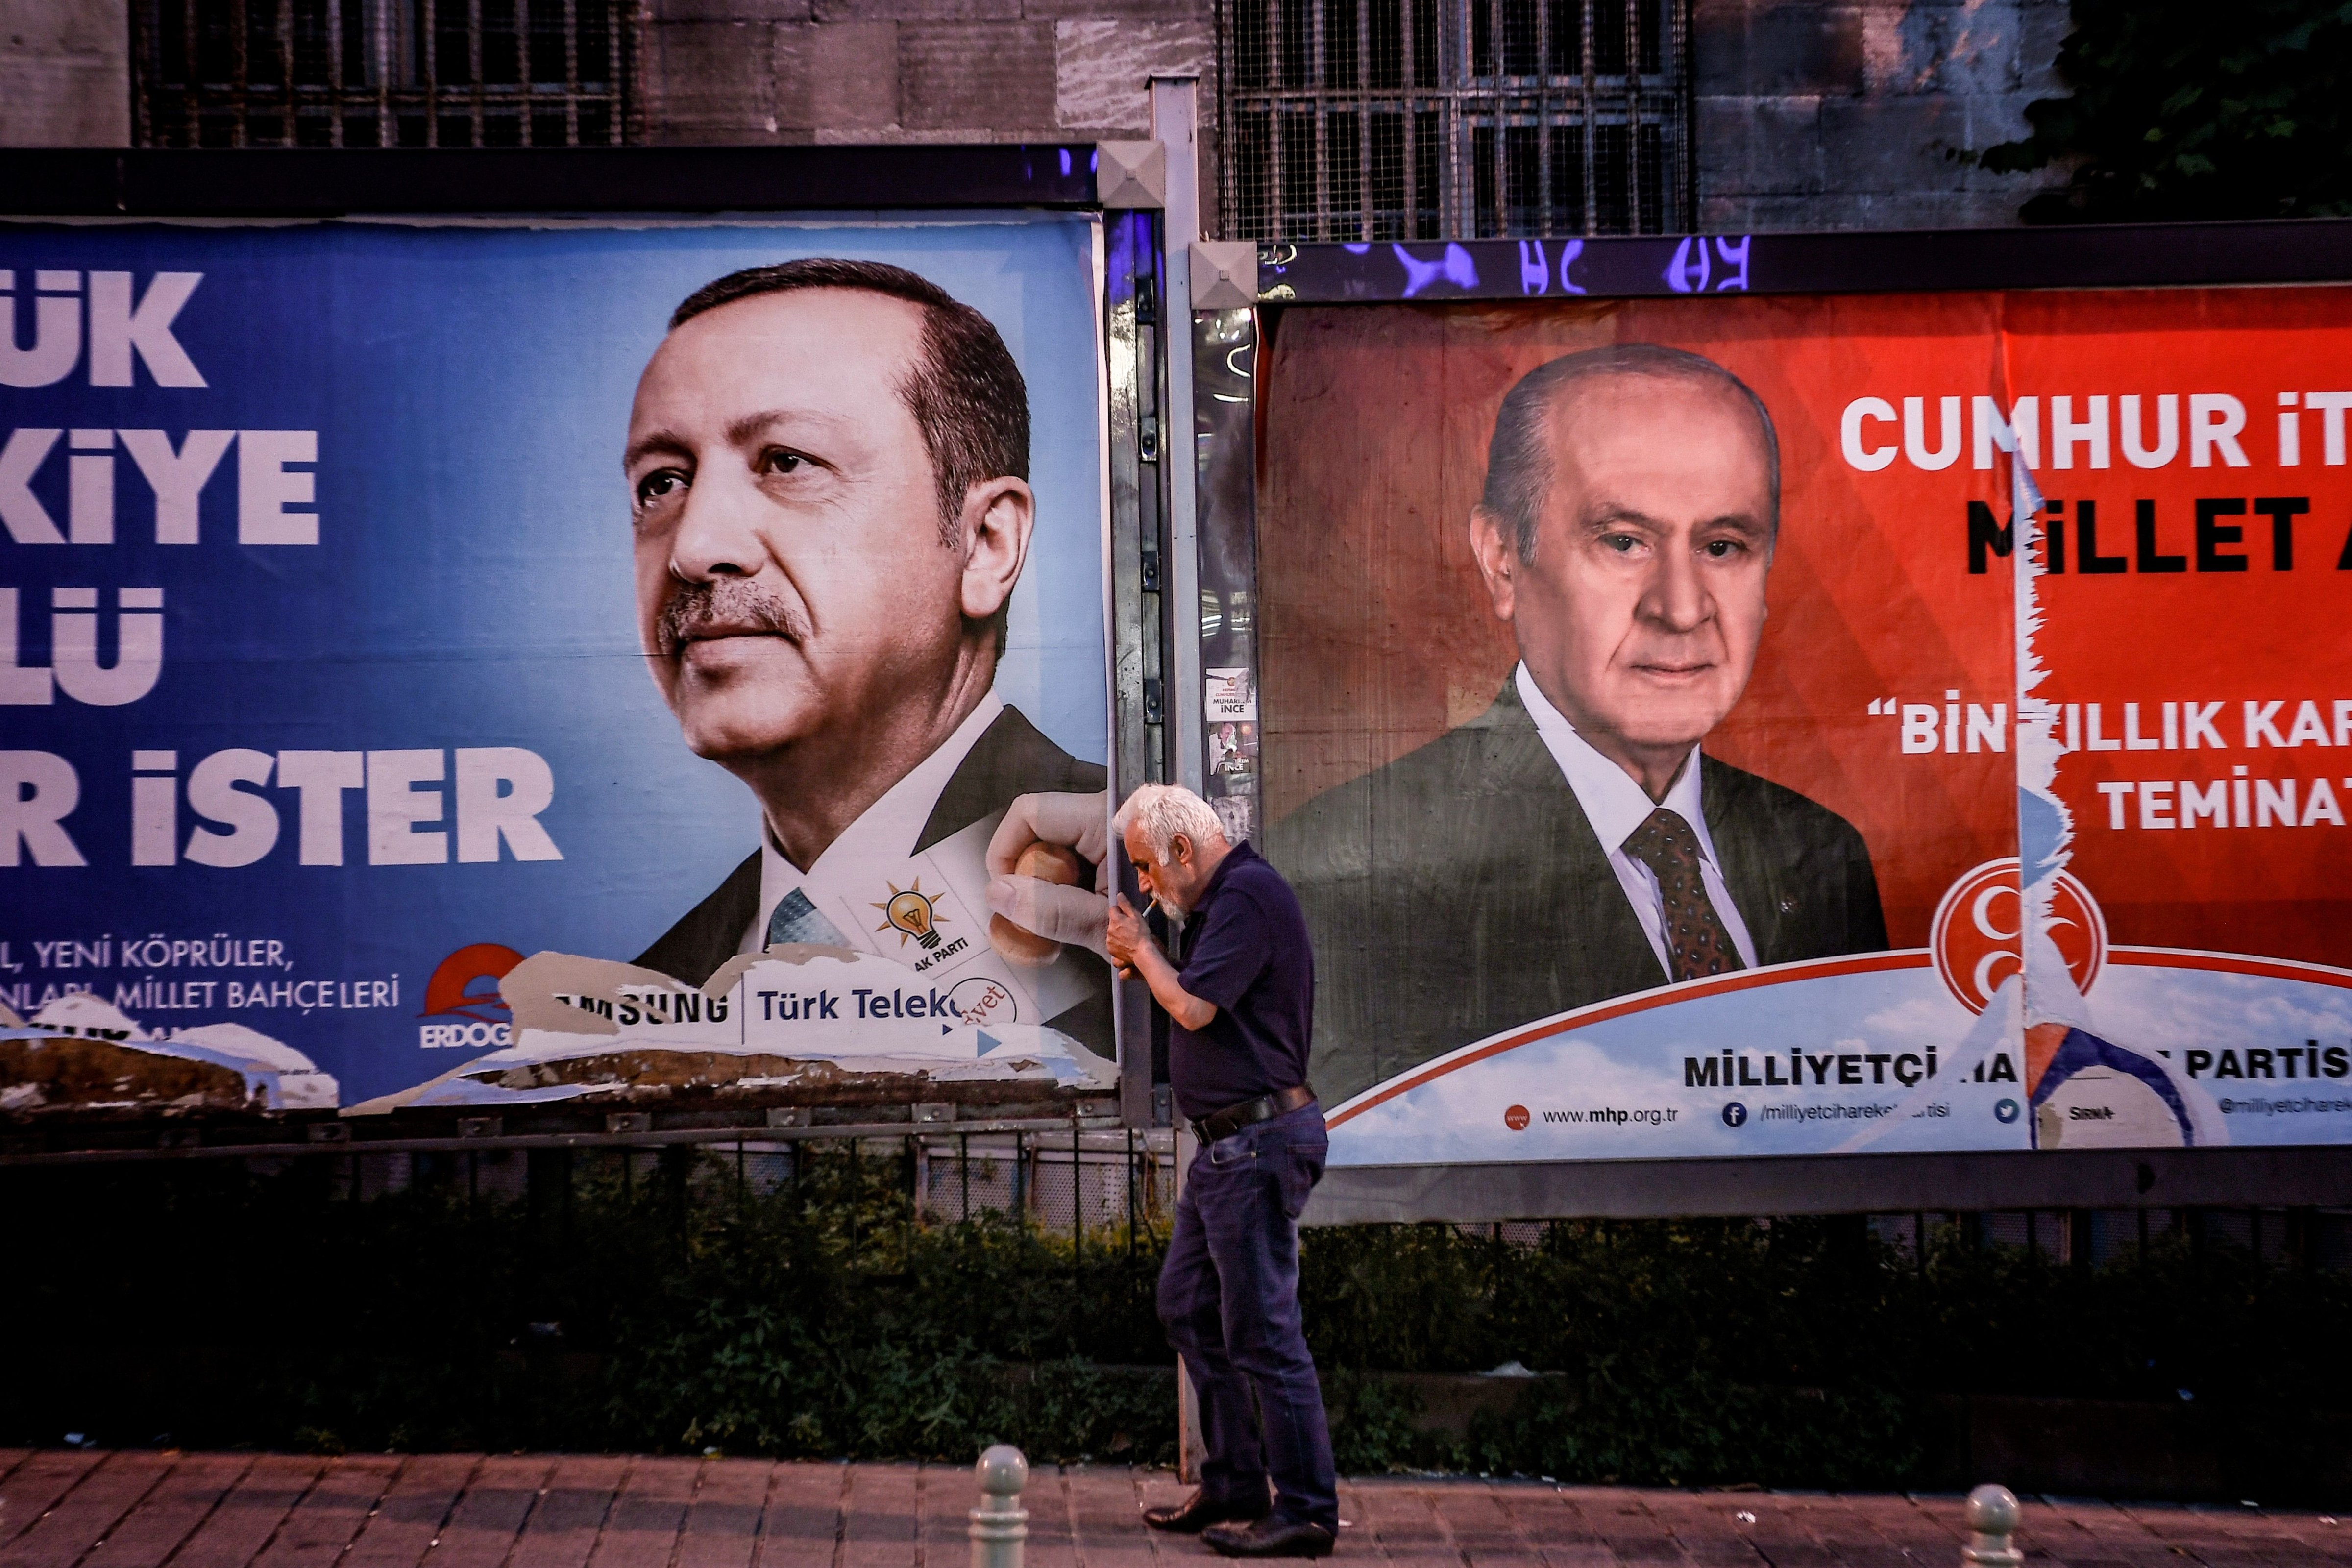 A pedestrian lights a cigarette as he walks past in banners with portraits of Turrkish President Recep Tayyip Erdogan (L) and the leader of Nationalist Movement Party (MHP) Devlet Bahceli in Istanbul on June 19, 2018. (Aris Messinis—AFP/Getty Images)